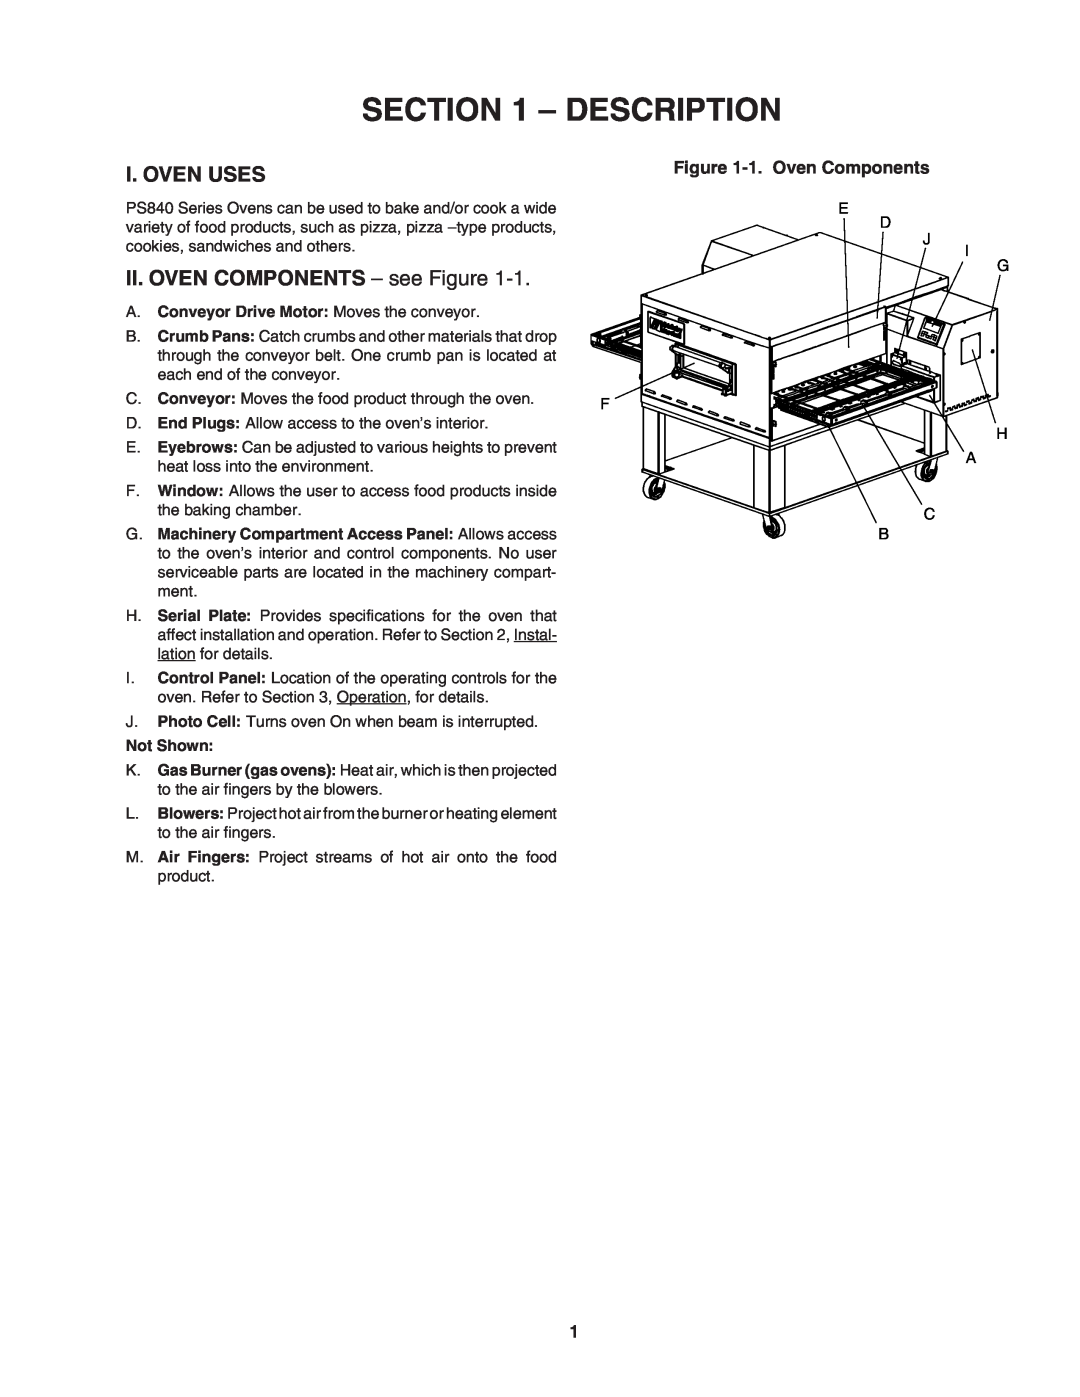 Middleby Marshall PS840 Series Description, I. Oven Uses, II. OVEN COMPONENTS - see Figure, 1. Oven Components 